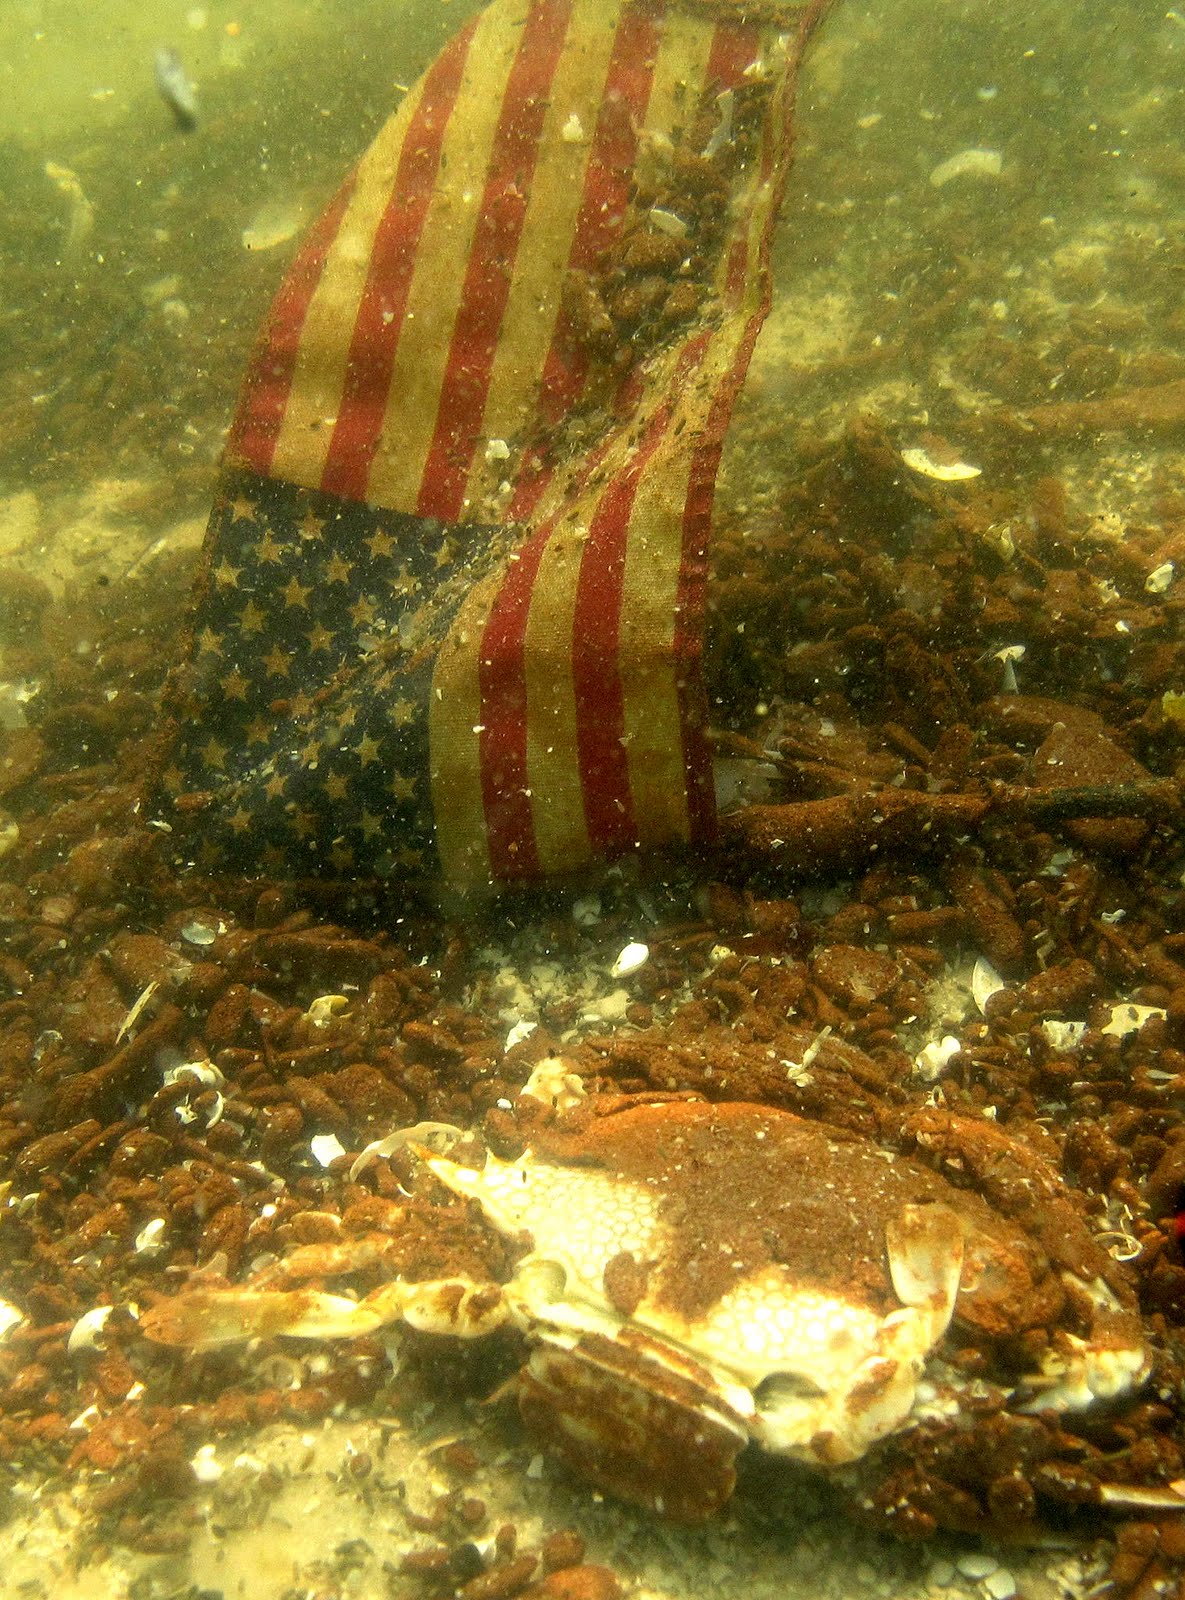 http://3.bp.blogspot.com/_xRraVcfa3GM/TCVmhfQGTBI/AAAAAAAACR4/OJy-AB6krAM/s1600/oil-covered-speckled-crab-with-american-flag.jpg